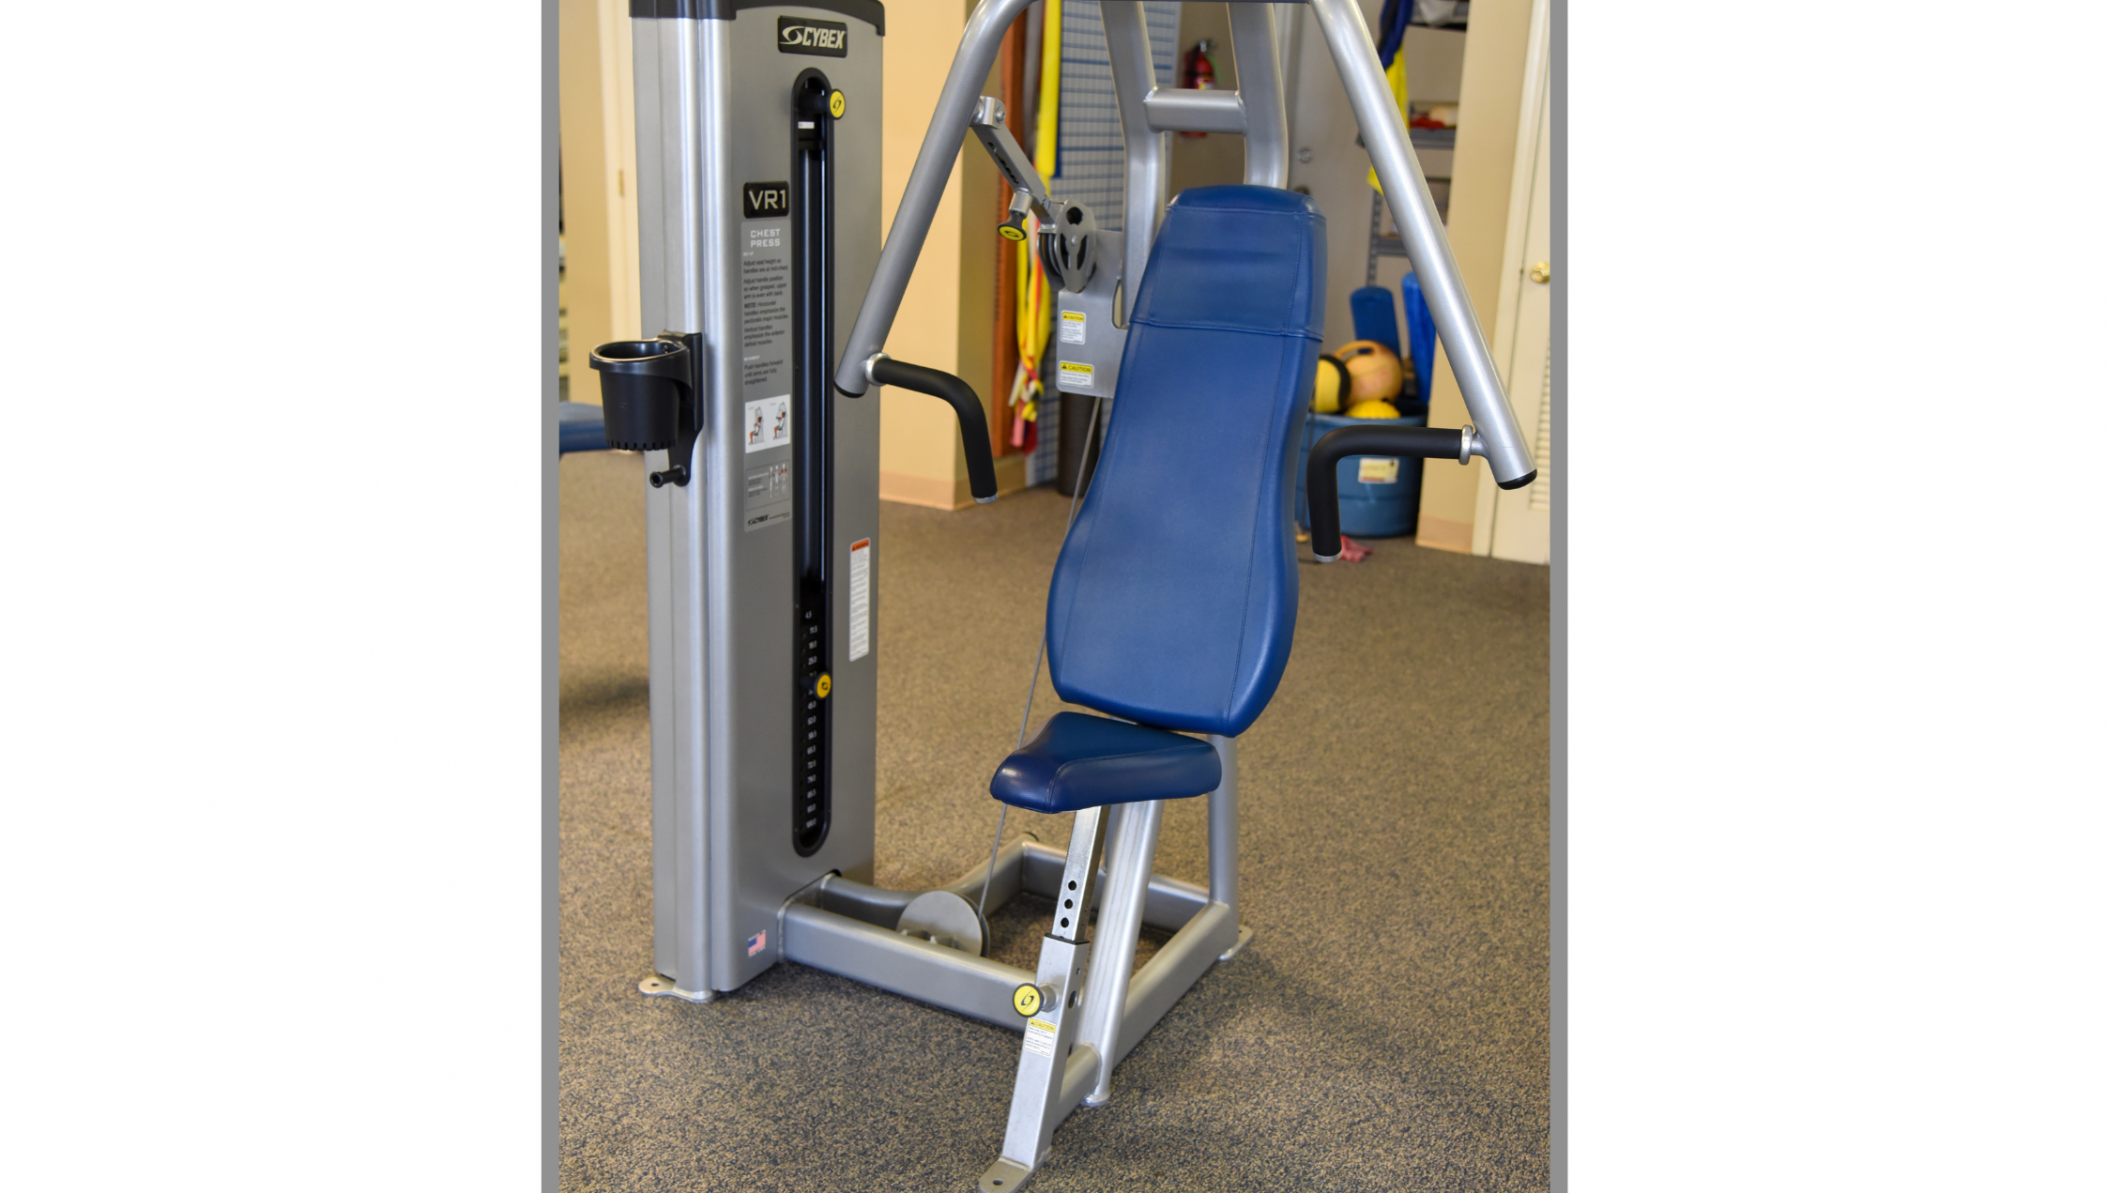 Cybex V Series Chest Press with Adjustable Carriage.